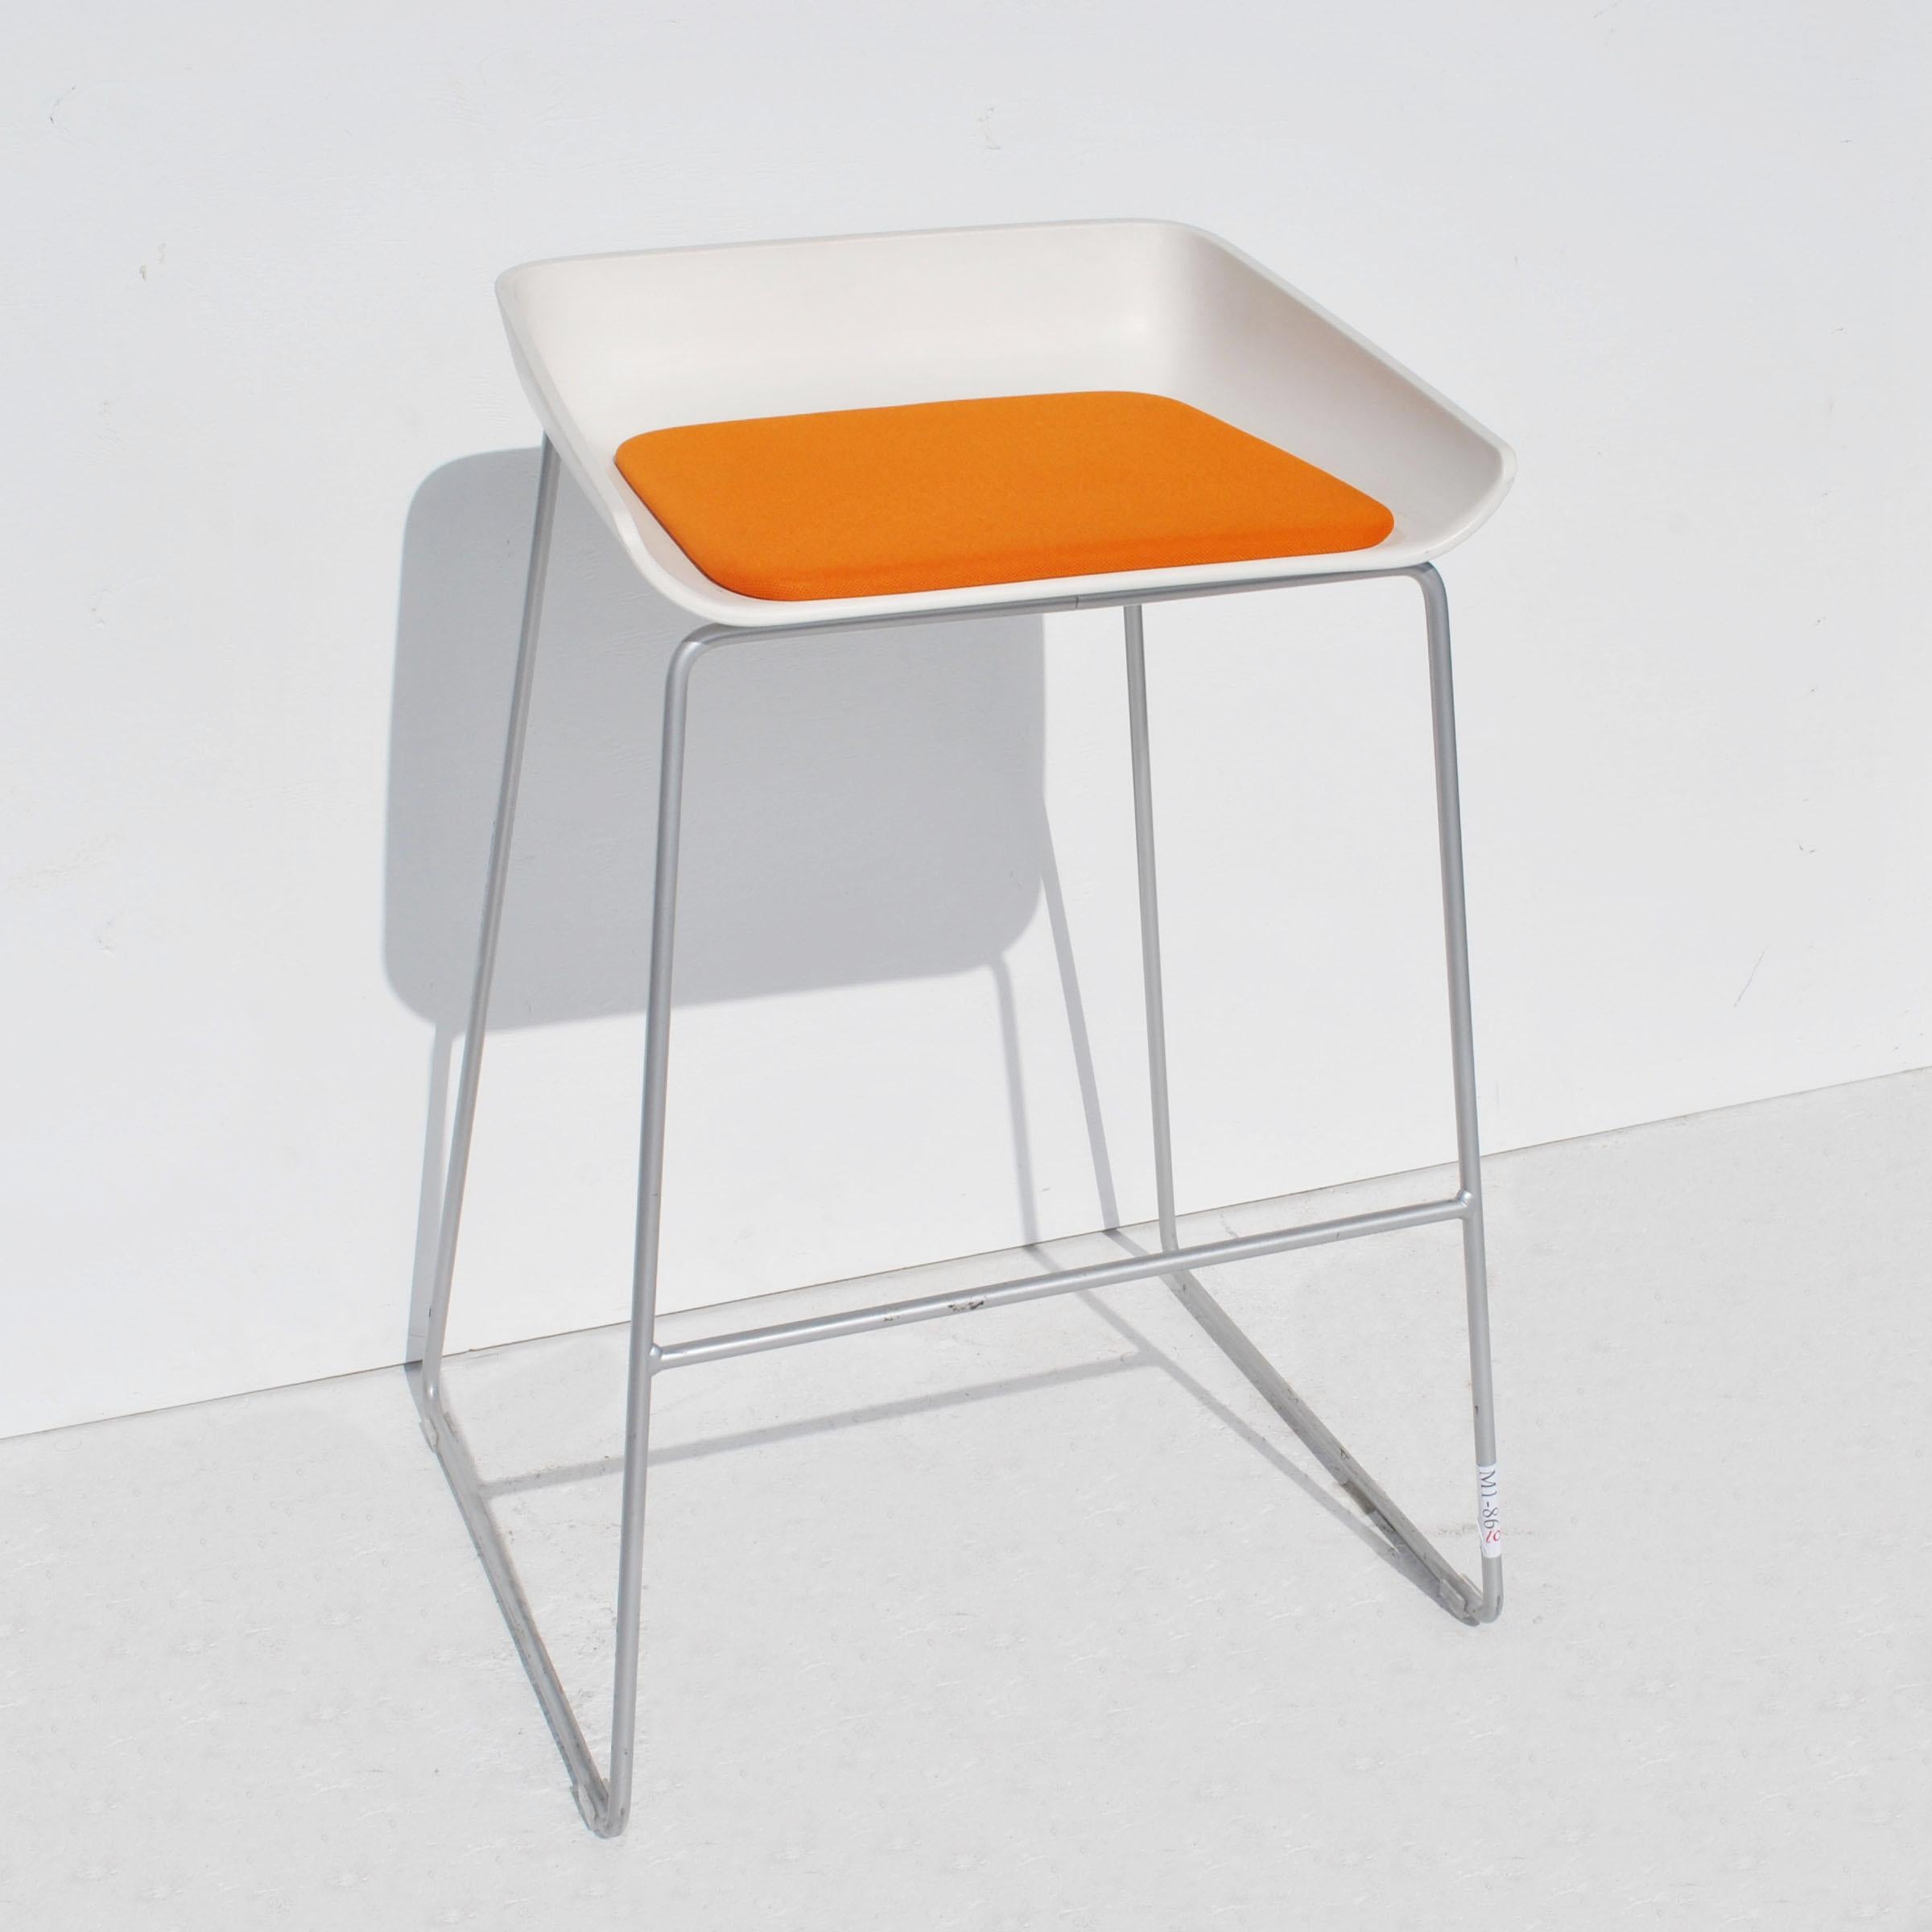 Set of 4 Scoop stools by Steelcase. These stylish stools provide space saving while the durable polypropylene construction ensures many years of durability.
Polypropylene base with orange upholstered seat.

Measures: Seat height 28.5.

When shopping